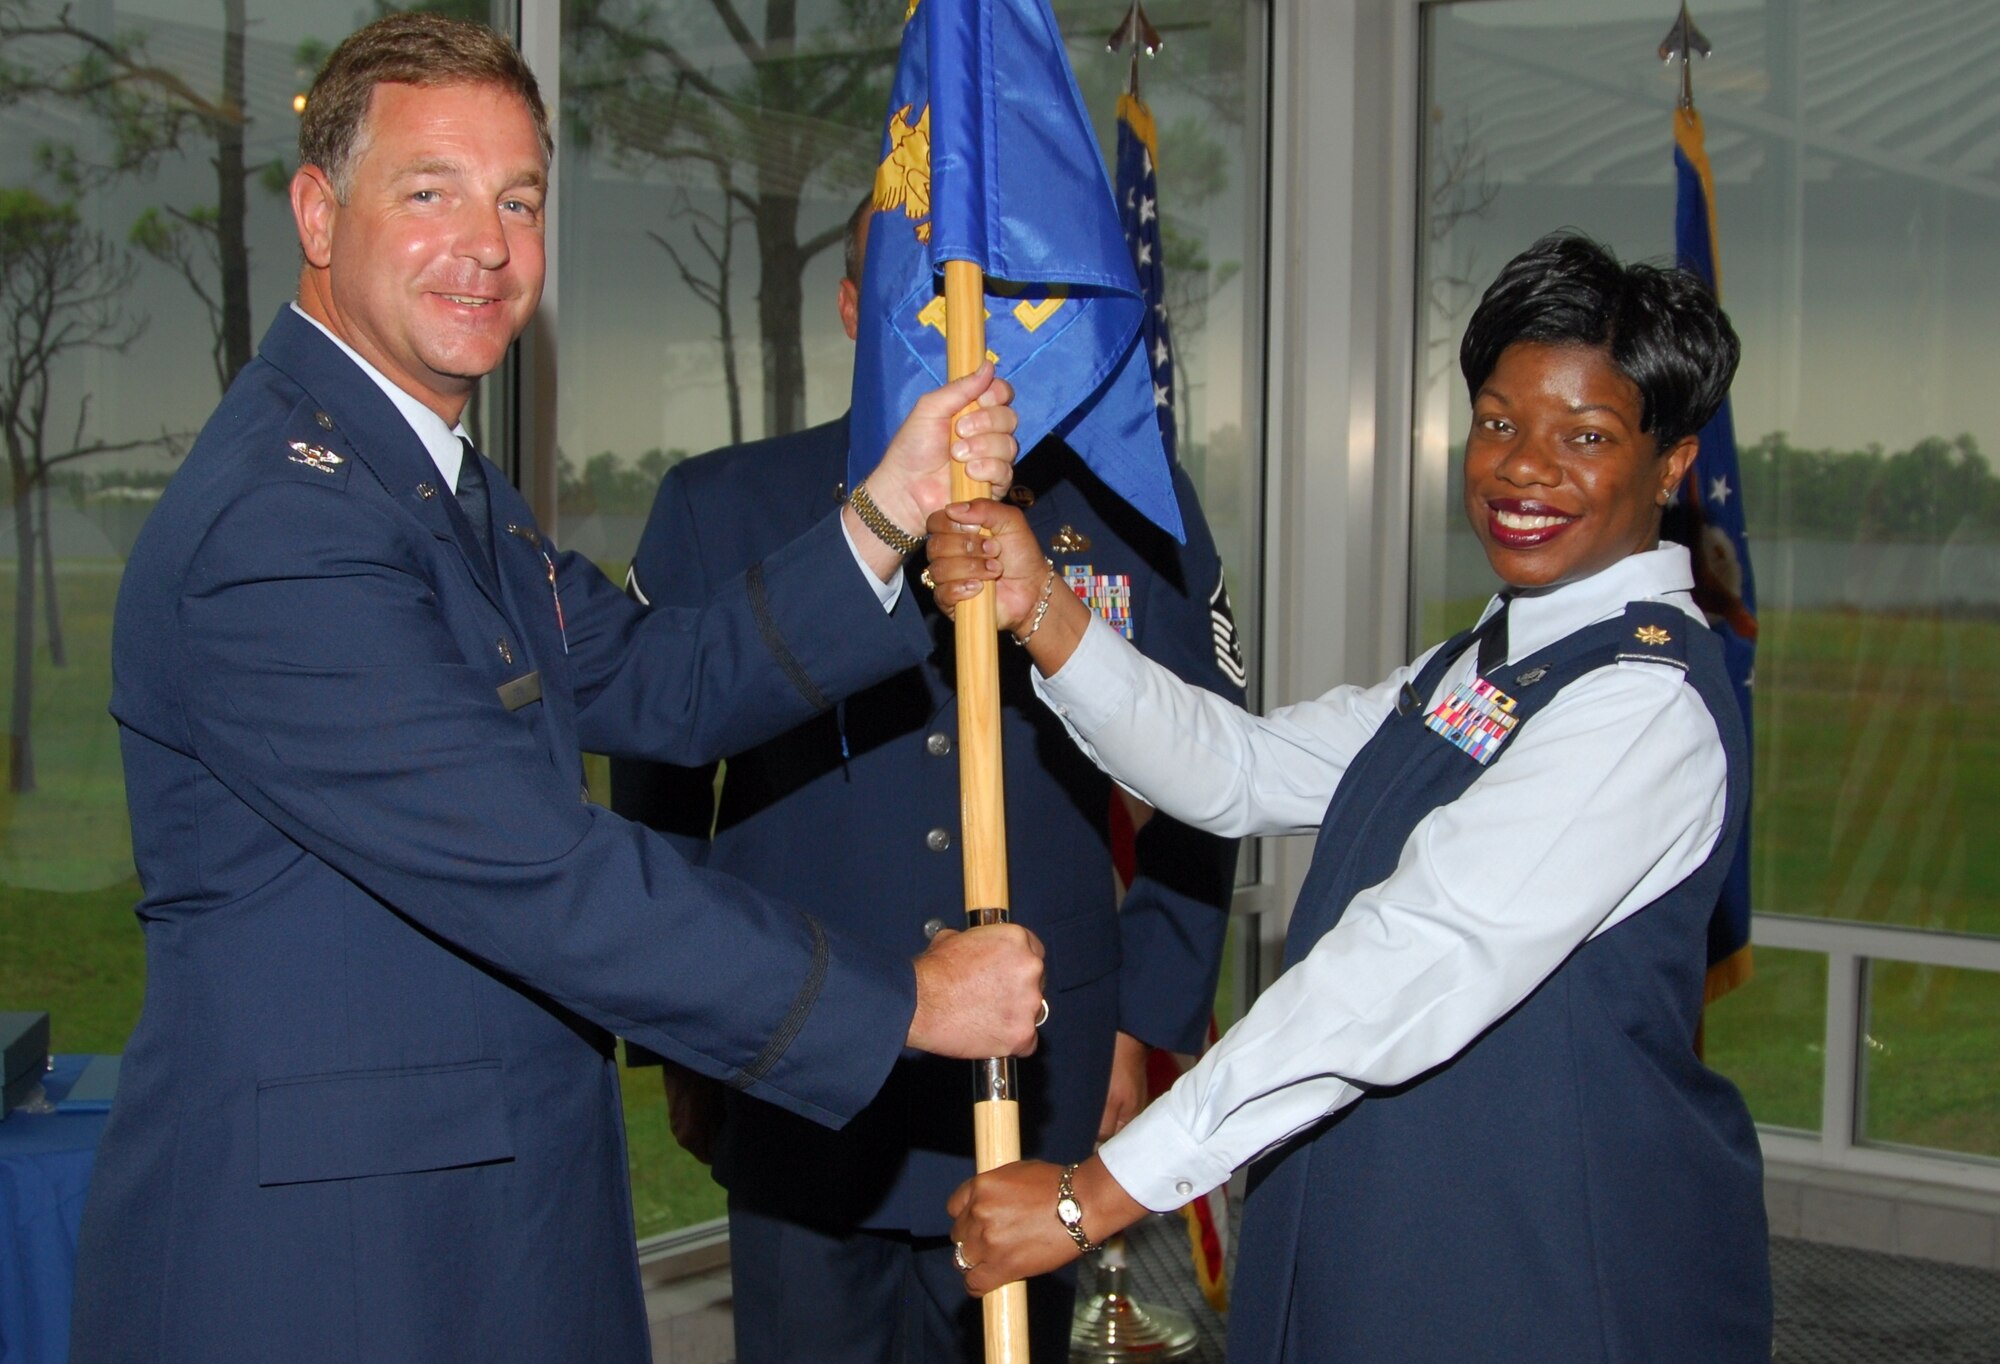 Col. David Zeh, 325th Mission Support Group commander, presents the guidon to Maj. Letitia Marsh as she takes command of the 325th Force Support Squadron.  The change of command ceremony took place June 29 at the Heritage Club.  Major Marsh took command over from Lt. Col. Michael Lamb.  (U.S. Air Force photo/Lisa Norman) 